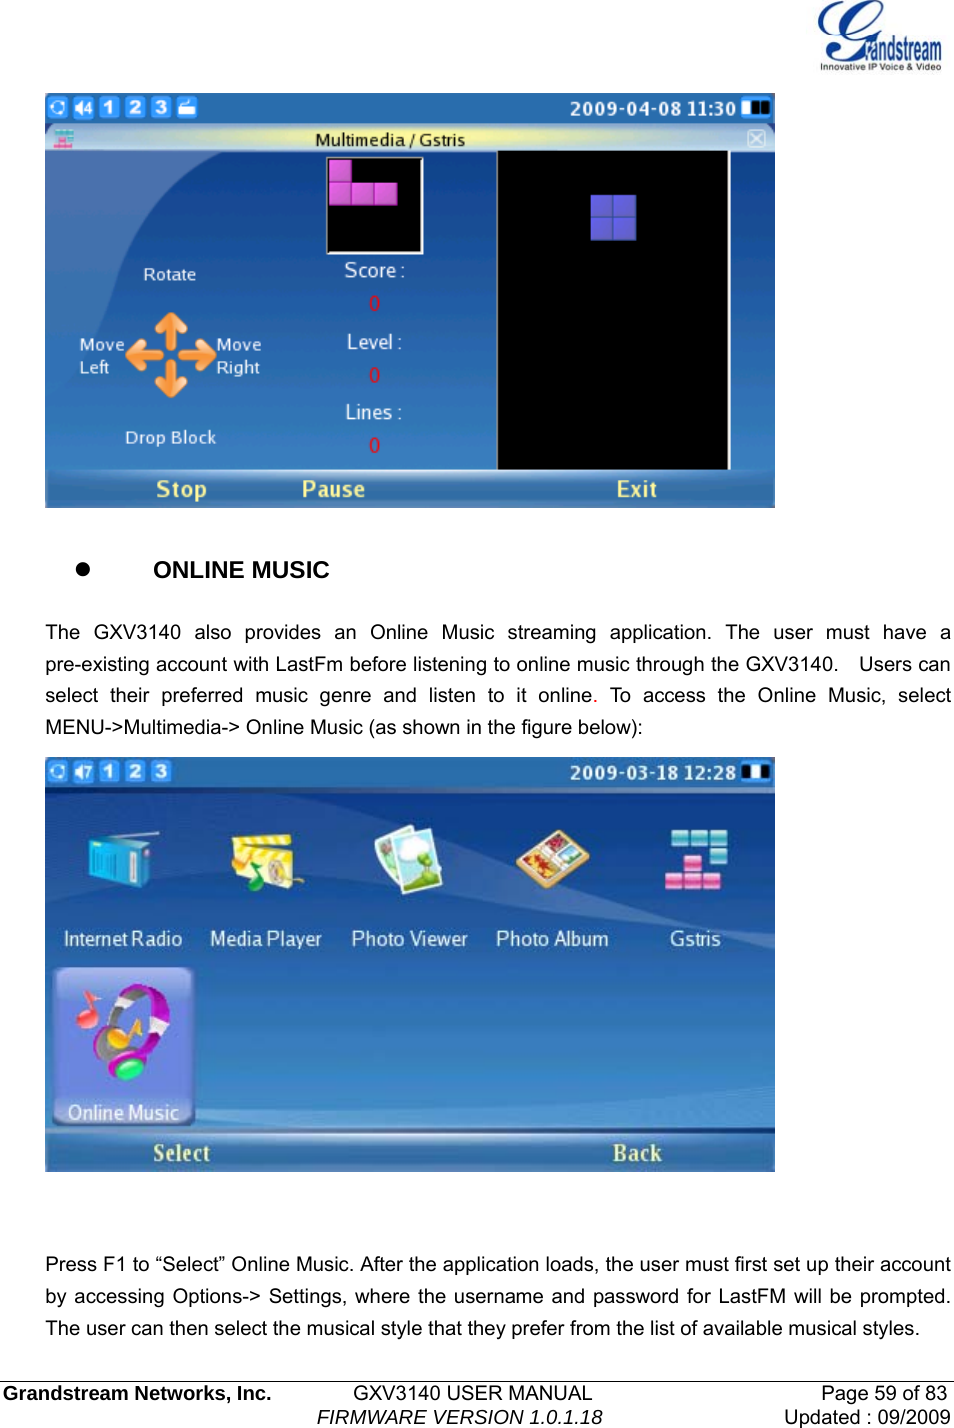   Grandstream Networks, Inc.        GXV3140 USER MANUAL                       Page 59 of 83                                FIRMWARE VERSION 1.0.1.18 Updated : 09/2009    z    ONLINE MUSIC  The GXV3140 also provides an Online Music streaming application. The user must have a pre-existing account with LastFm before listening to online music through the GXV3140.    Users can select their preferred music genre and listen to it online. To access the Online Music, select MENU-&gt;Multimedia-&gt; Online Music (as shown in the figure below):      Press F1 to “Select” Online Music. After the application loads, the user must first set up their account by accessing Options-&gt; Settings, where the username and password for LastFM will be prompted. The user can then select the musical style that they prefer from the list of available musical styles.   